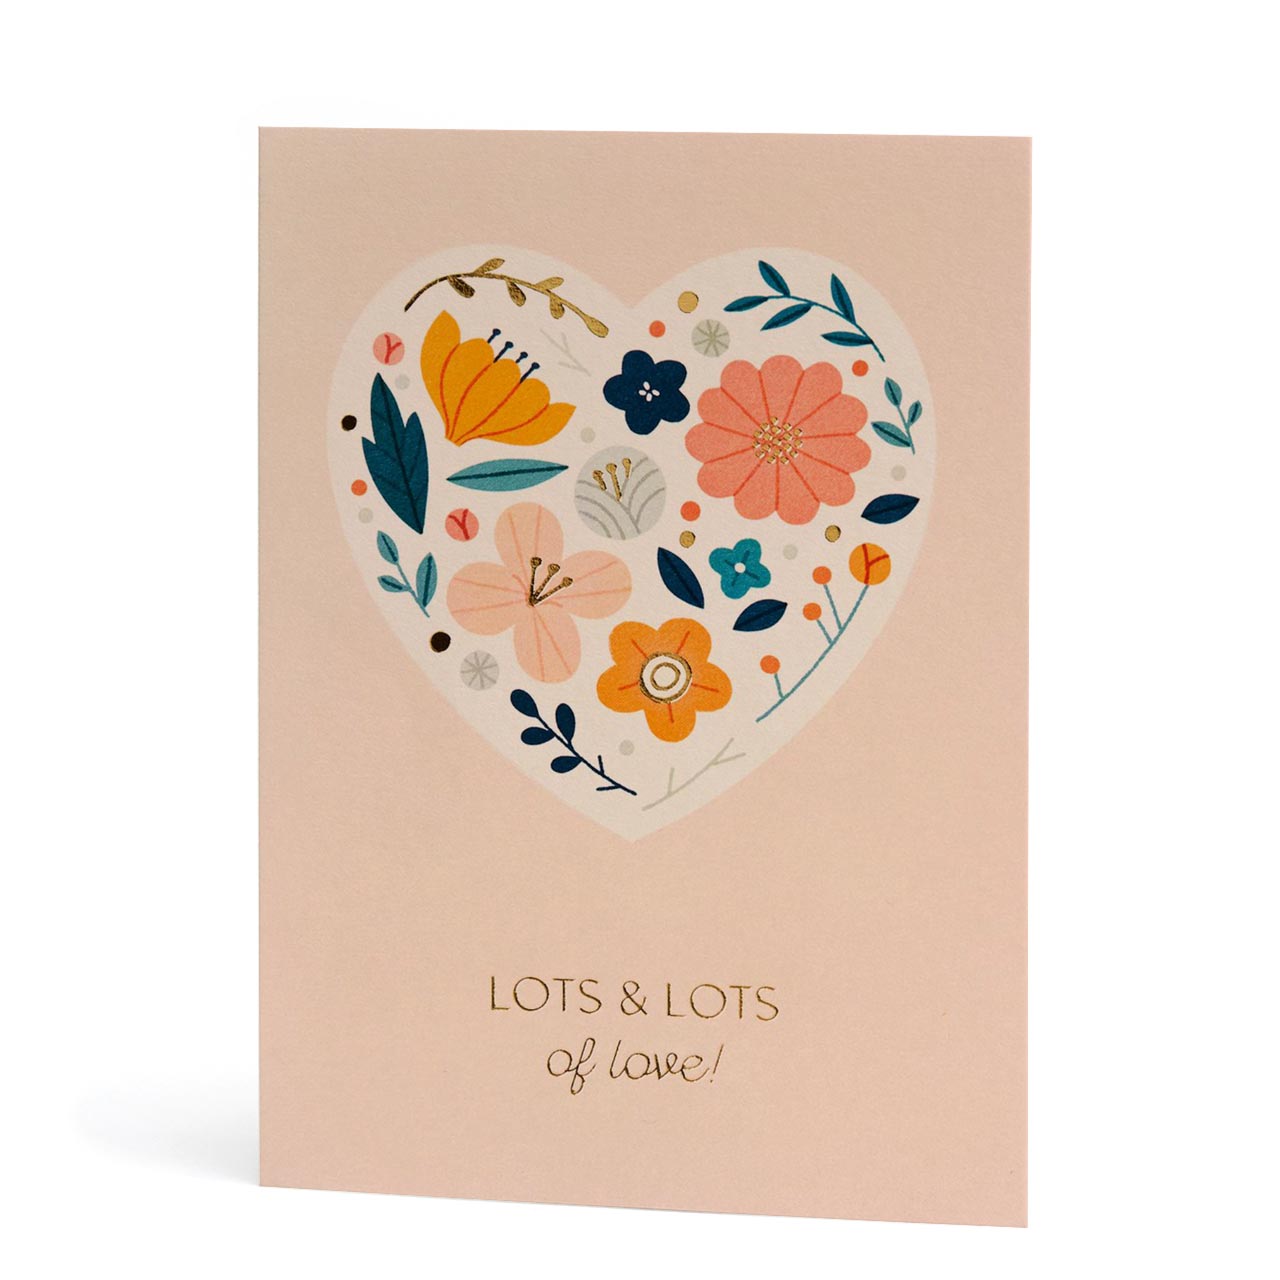 Lots of Love Heart Gold Foil Card